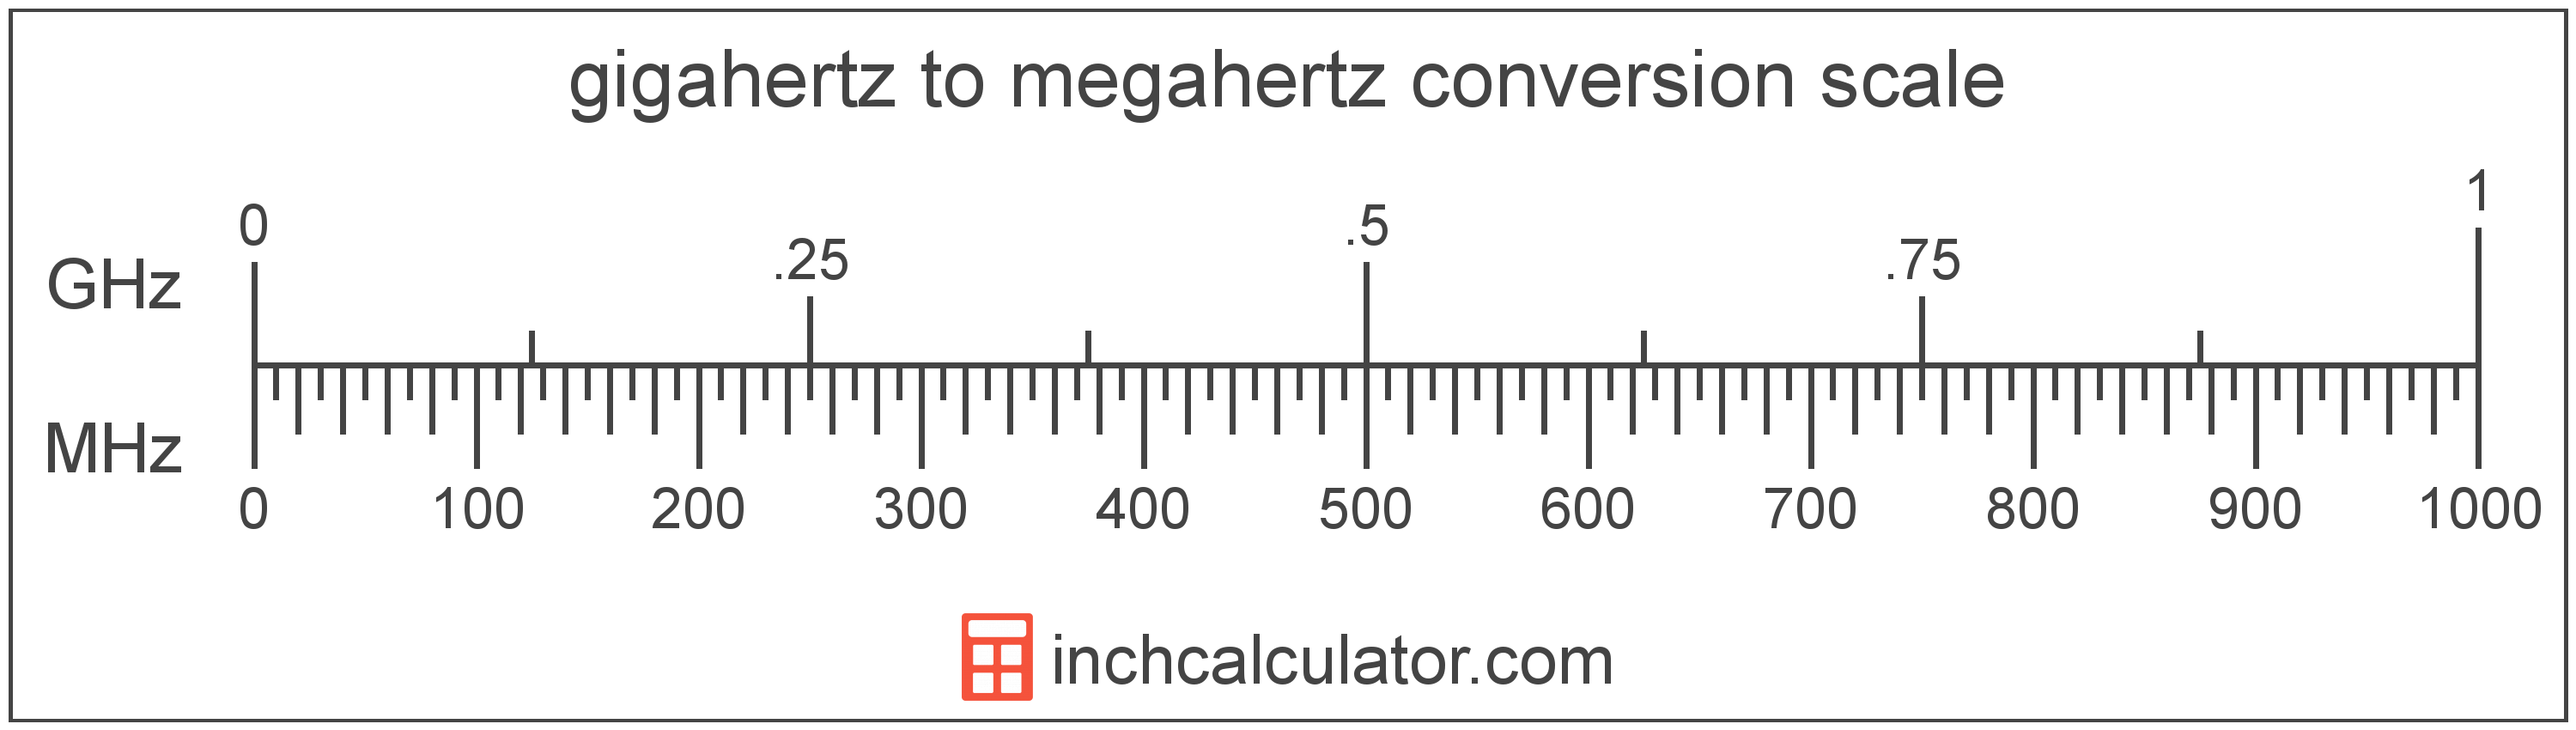 conversion scale showing megahertz and equivalent gigahertz frequency values